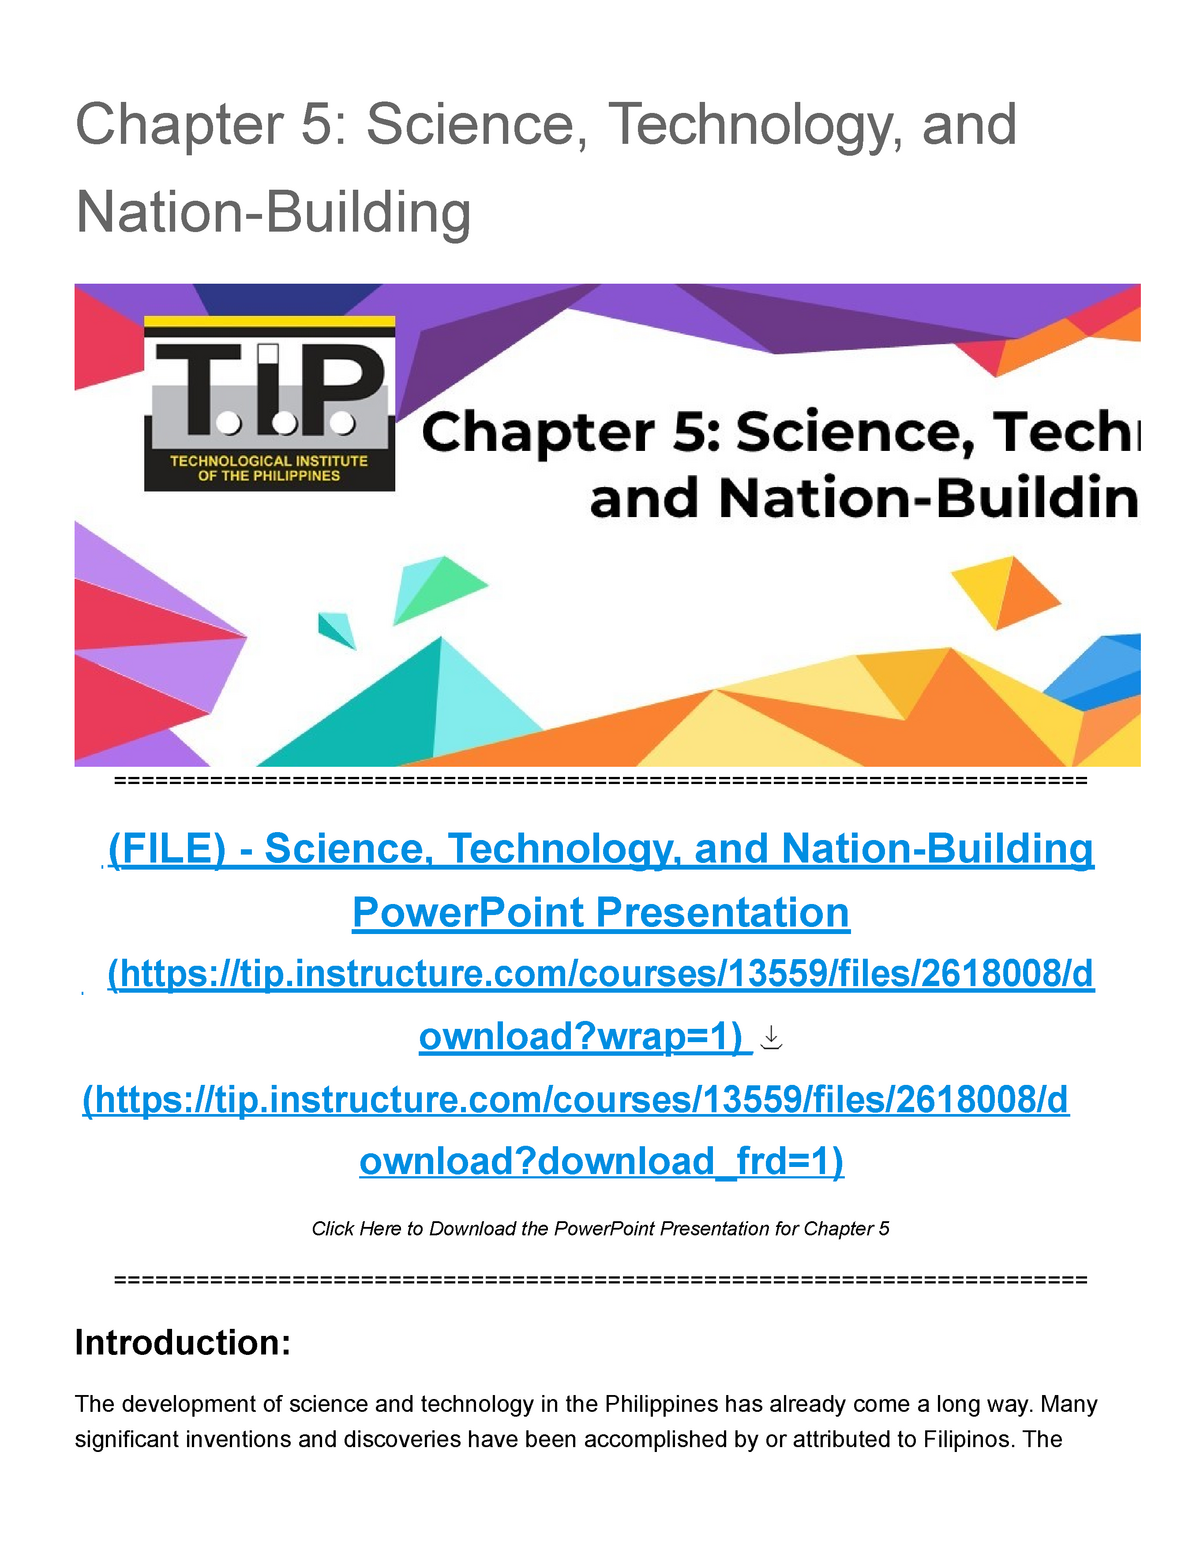 role of science and technology in nation building essay